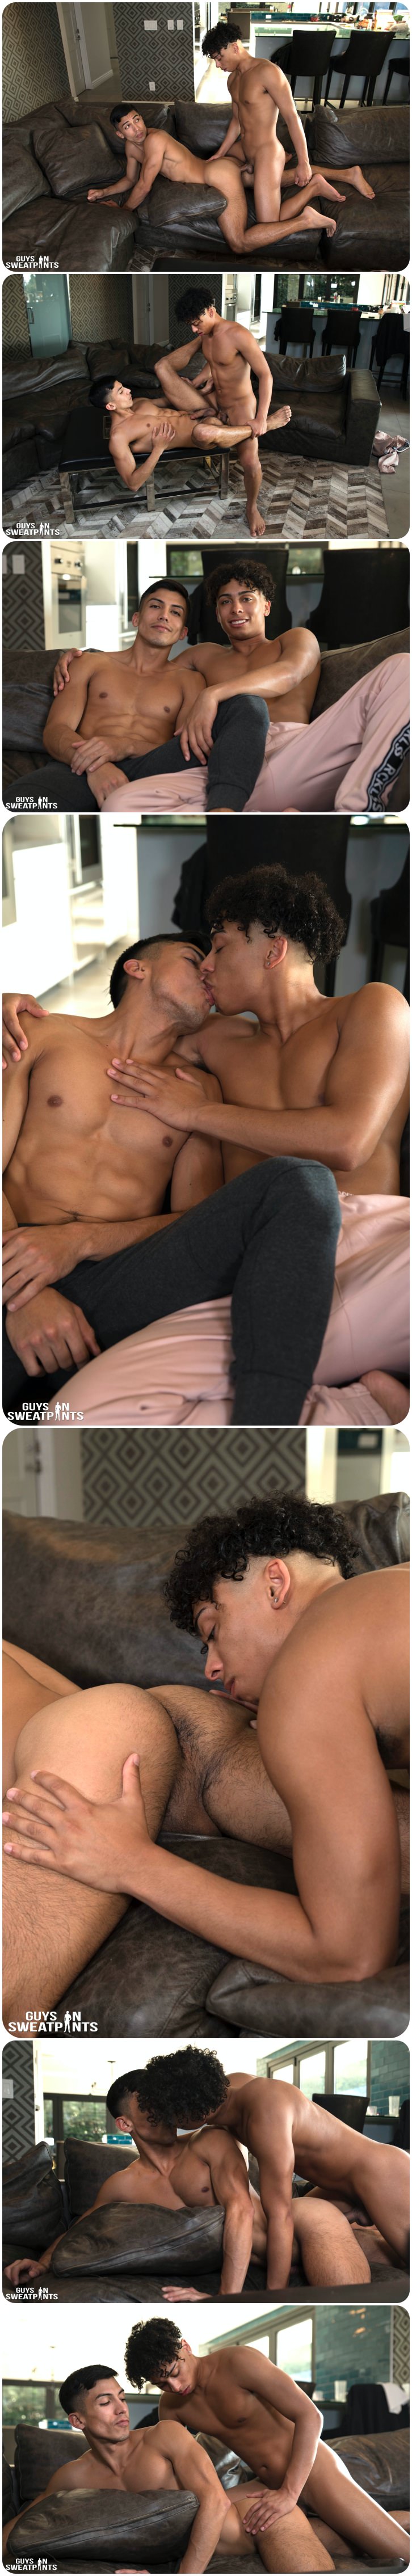 Guys In Sweatpants, Marcus Young, Romeo Foxx